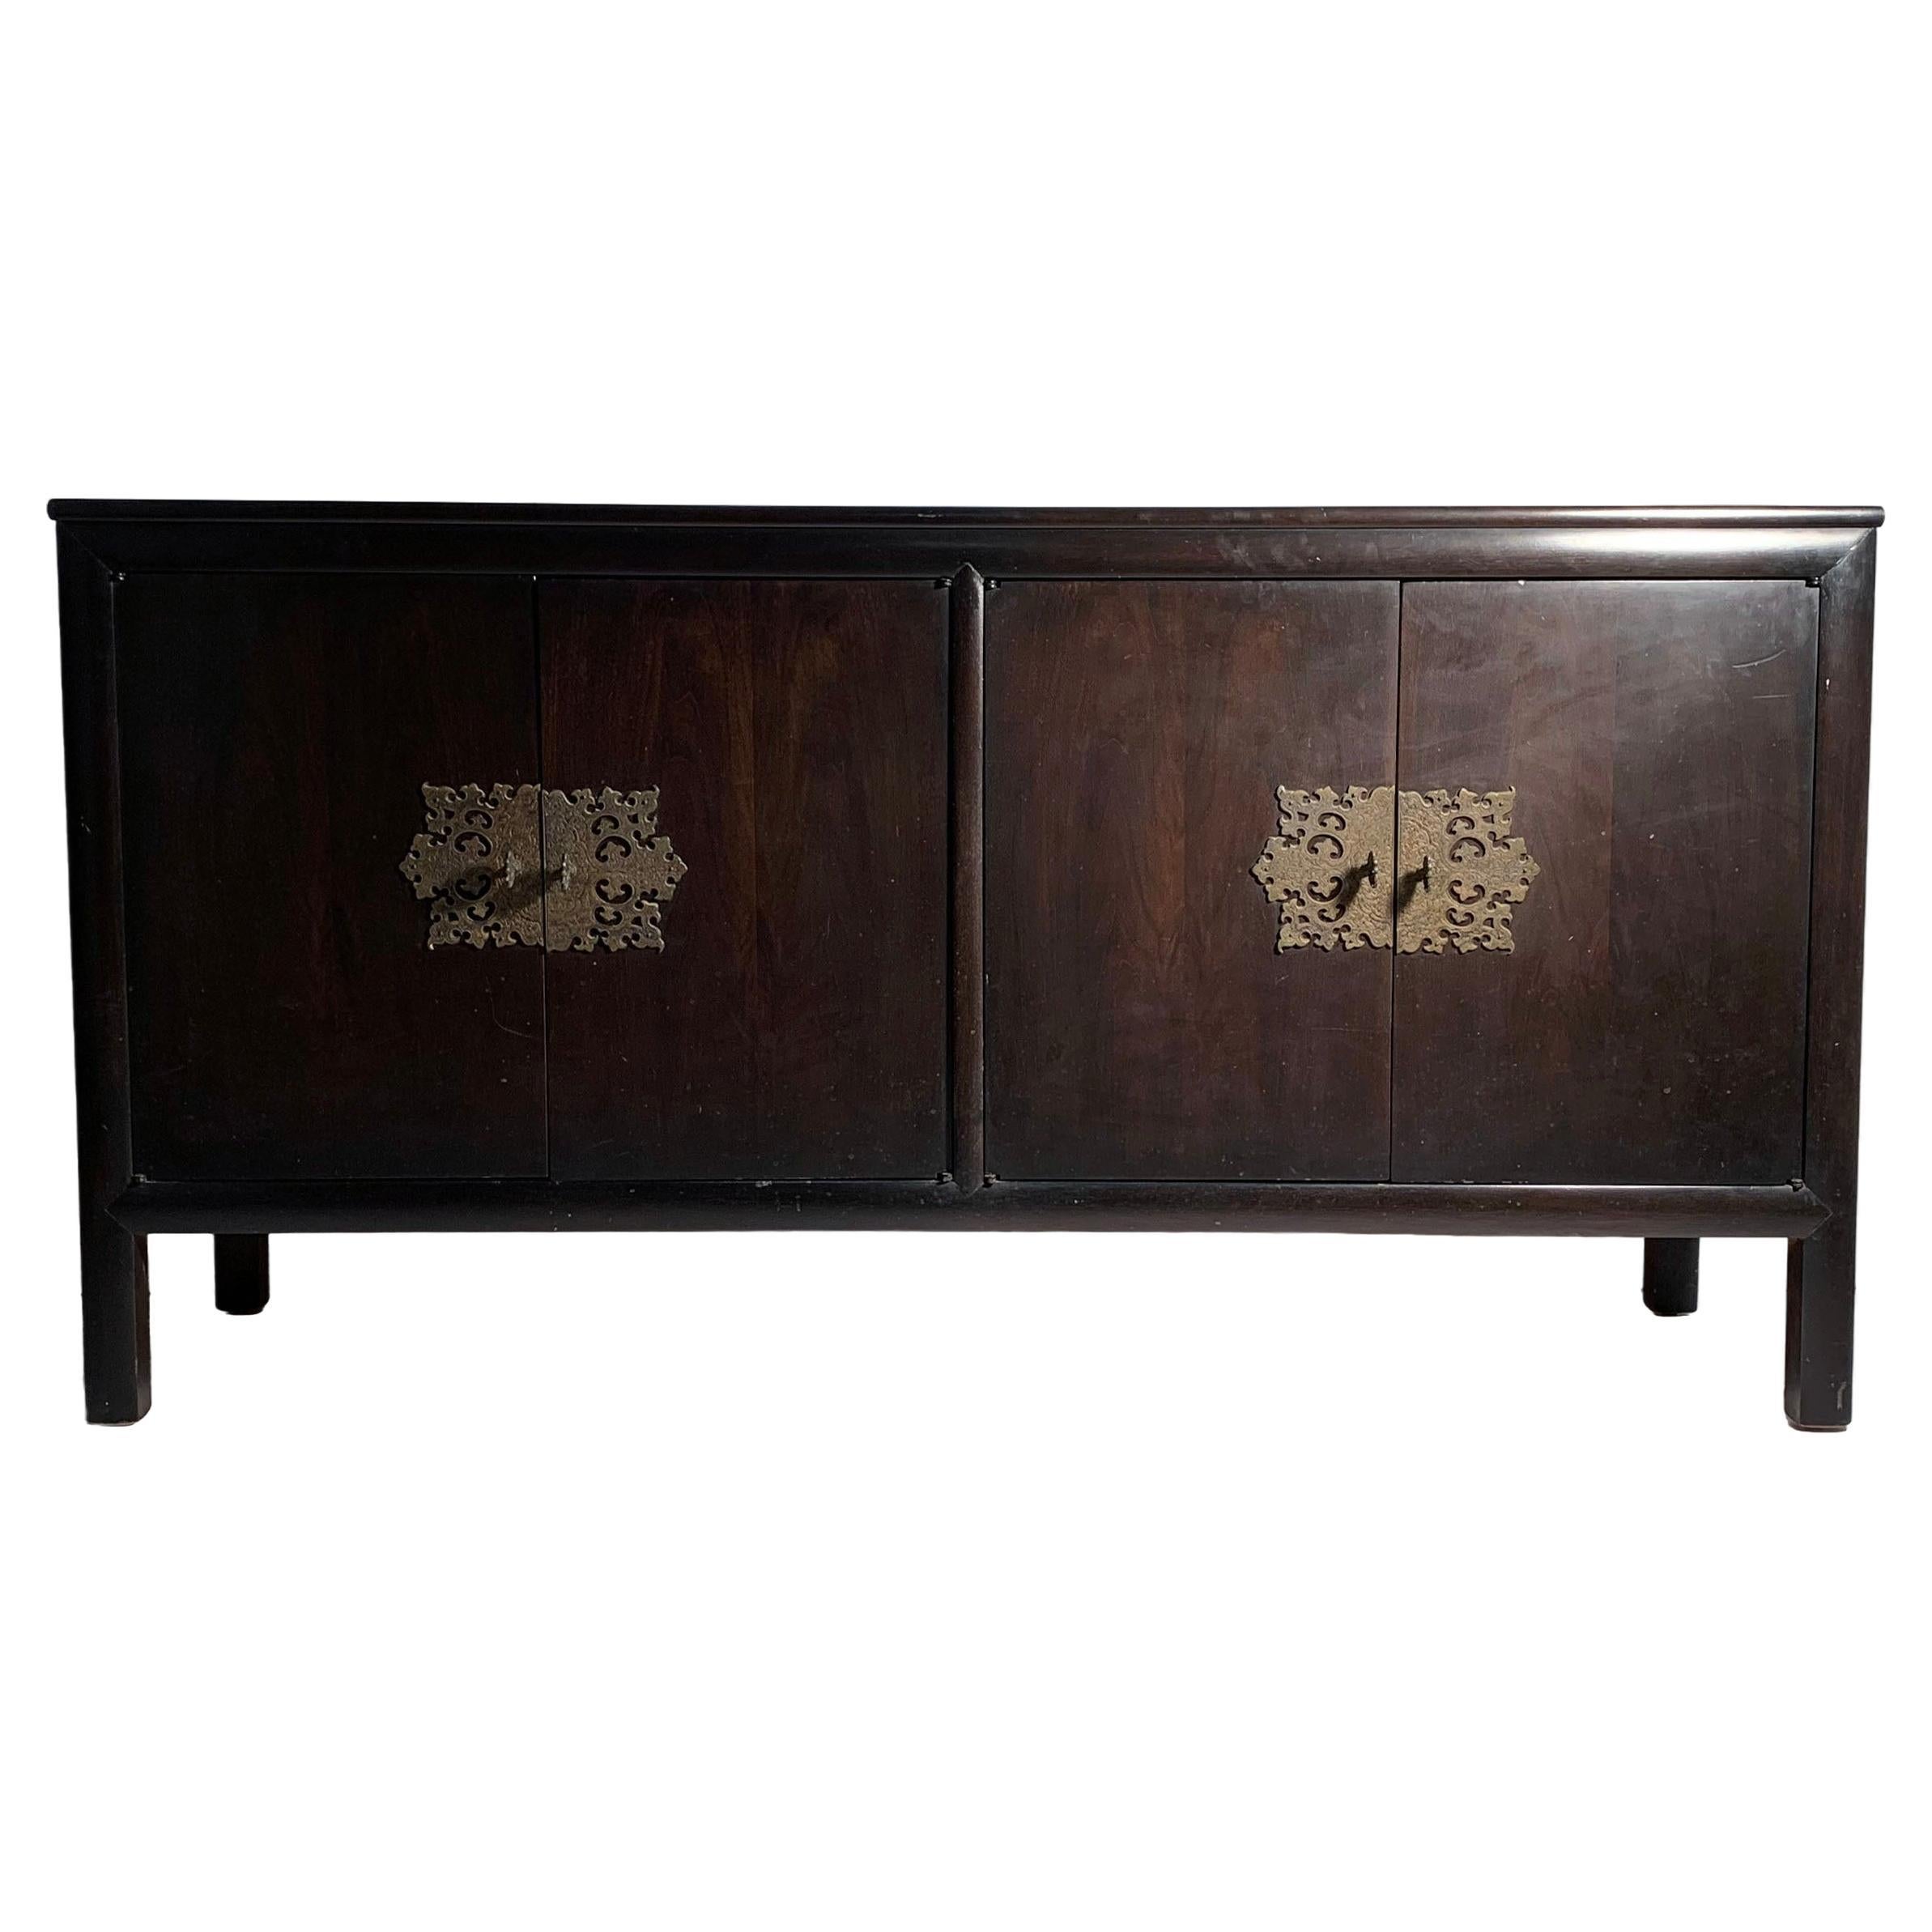 Vintage Credenza Cabinet Attributed to Renzo Rutili For Sale